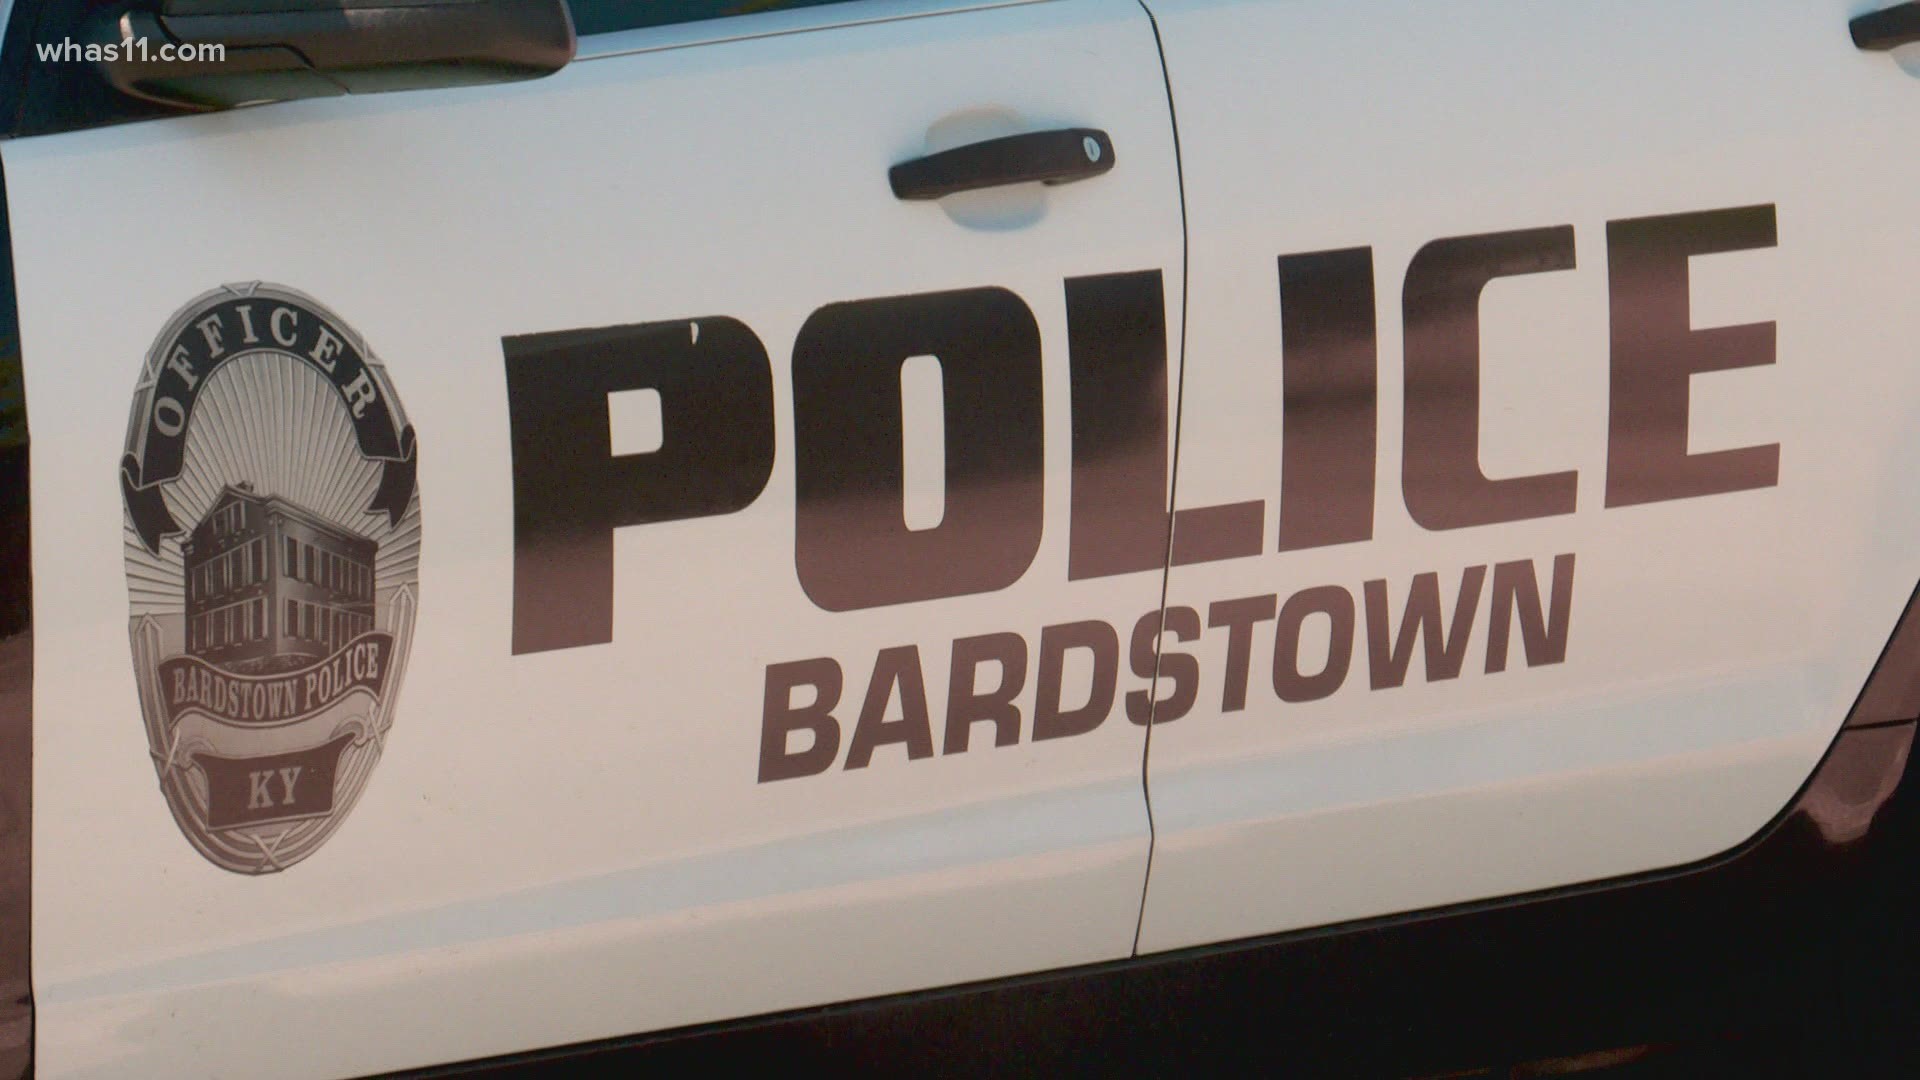 Bardstown Police officers are getting special training to help them better understand and interact with autistic members of their community.